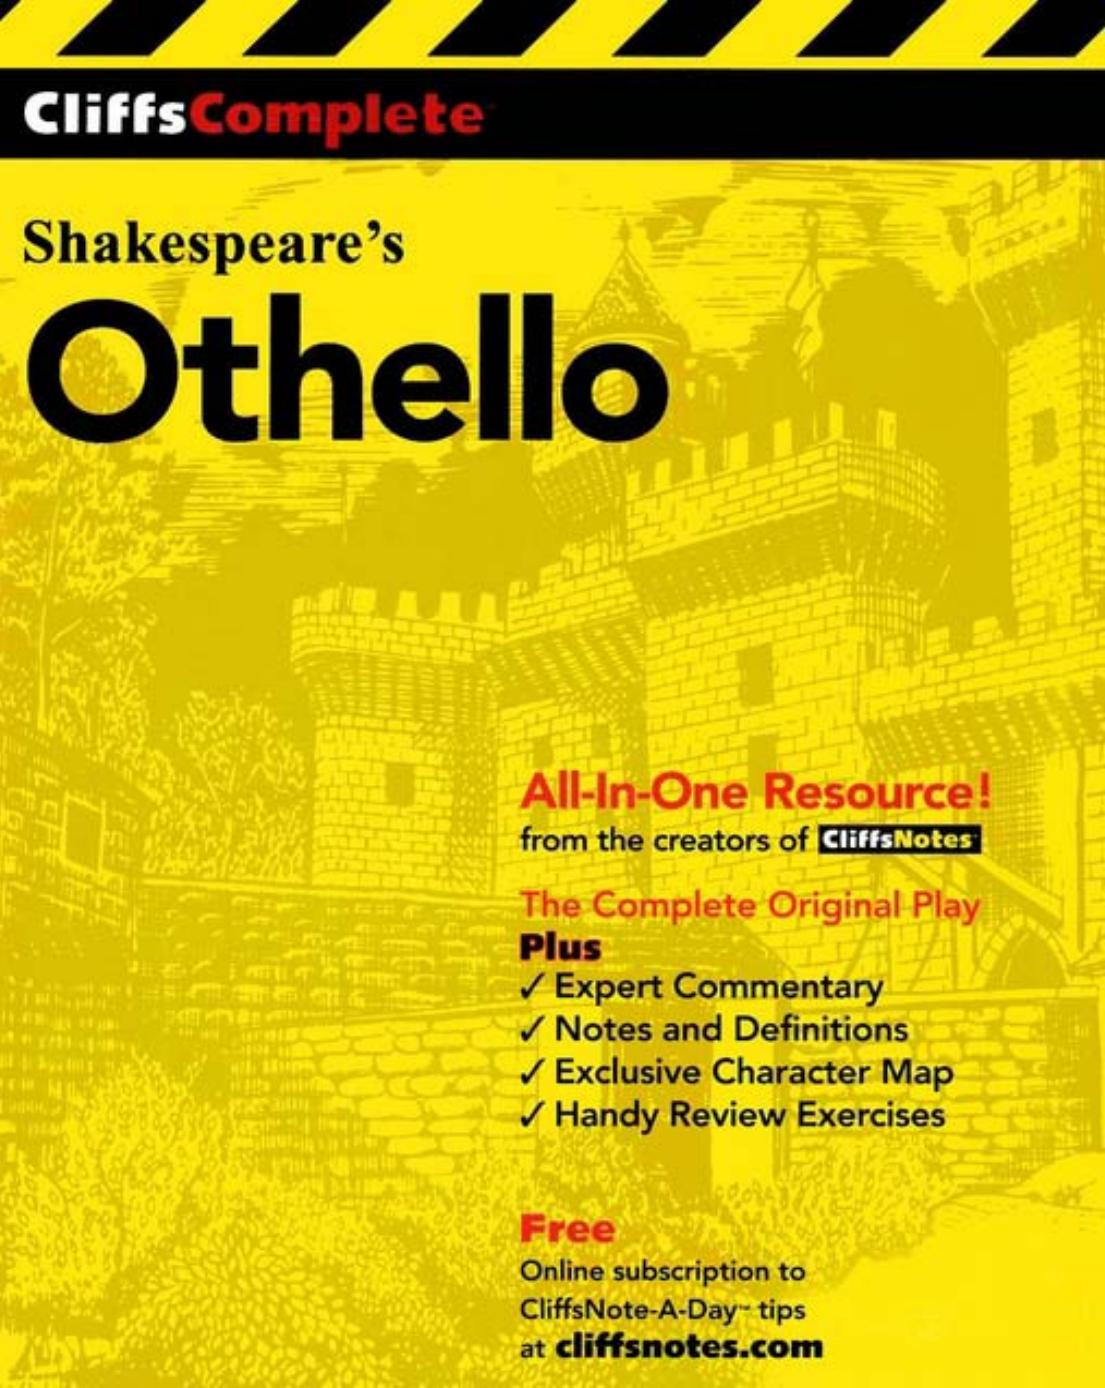 Cliffs Complete Shakespeare's Othello by Kate Maurer Edited by Sidney Lamb